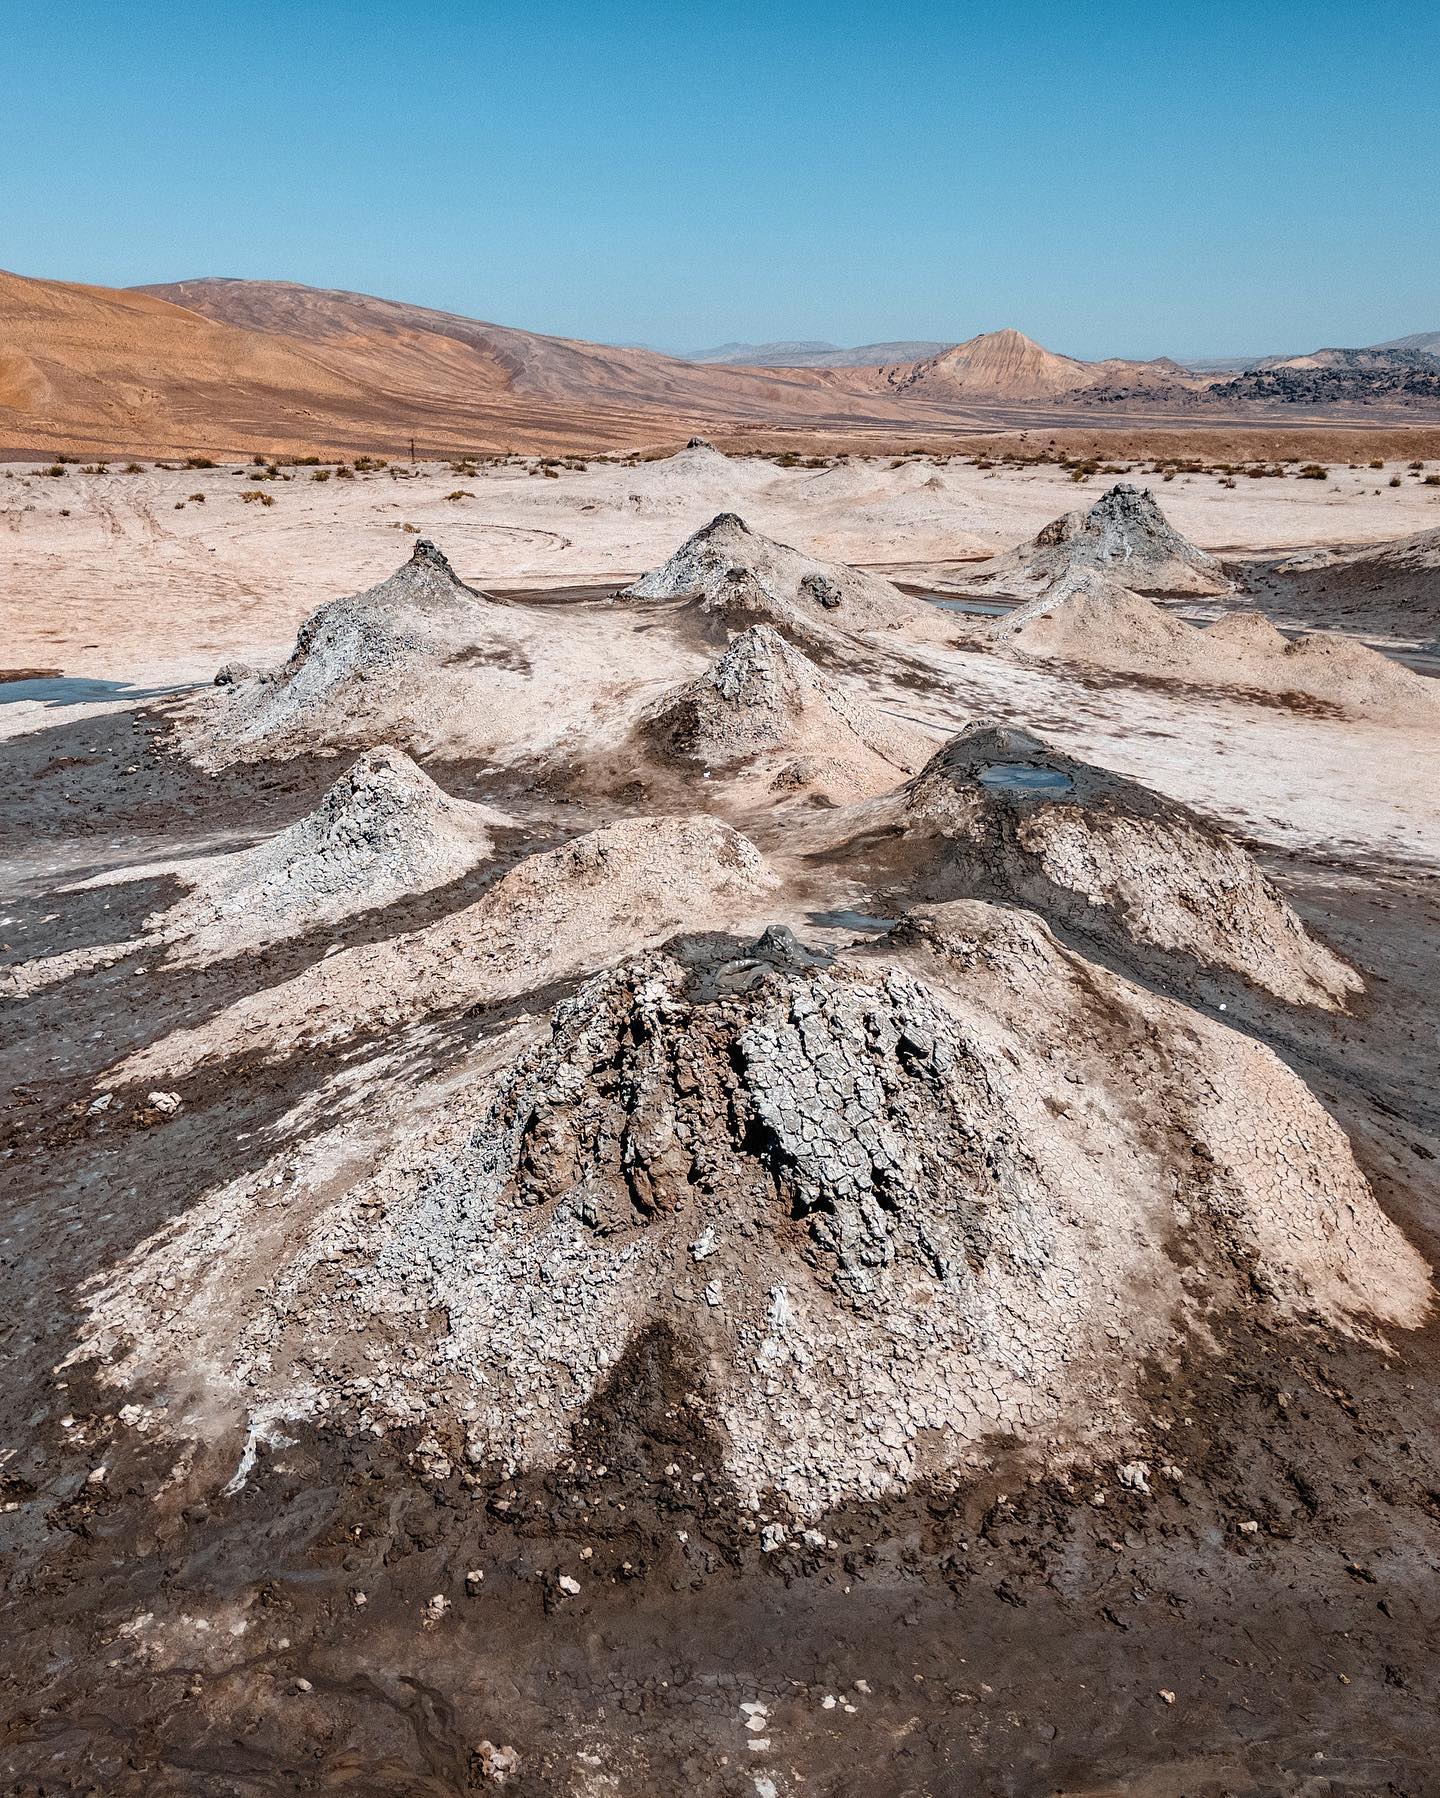 Azerbaijan has the most mud volcanos of any country in the world.  I witnessed this bizarre sight in May on my visit to Gobustan.